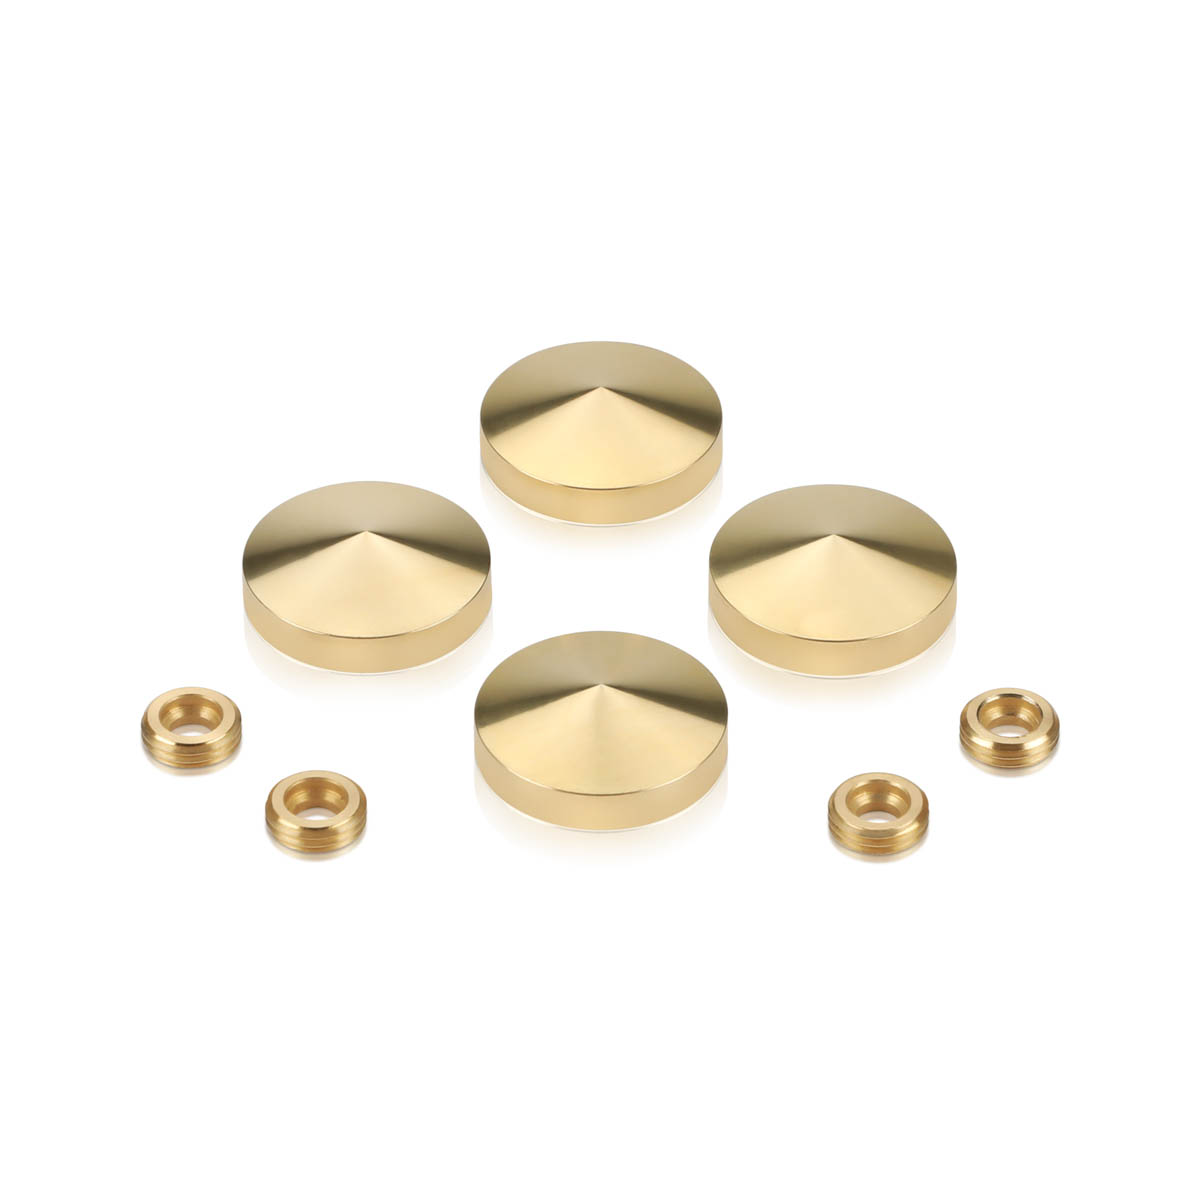 Set of 4 Conical Screw Cover, Diameter: 1'', Brass Plain Finish (Indoor or Outdoor Use, but for outdoor use Brass will come darker if no varnish applied)